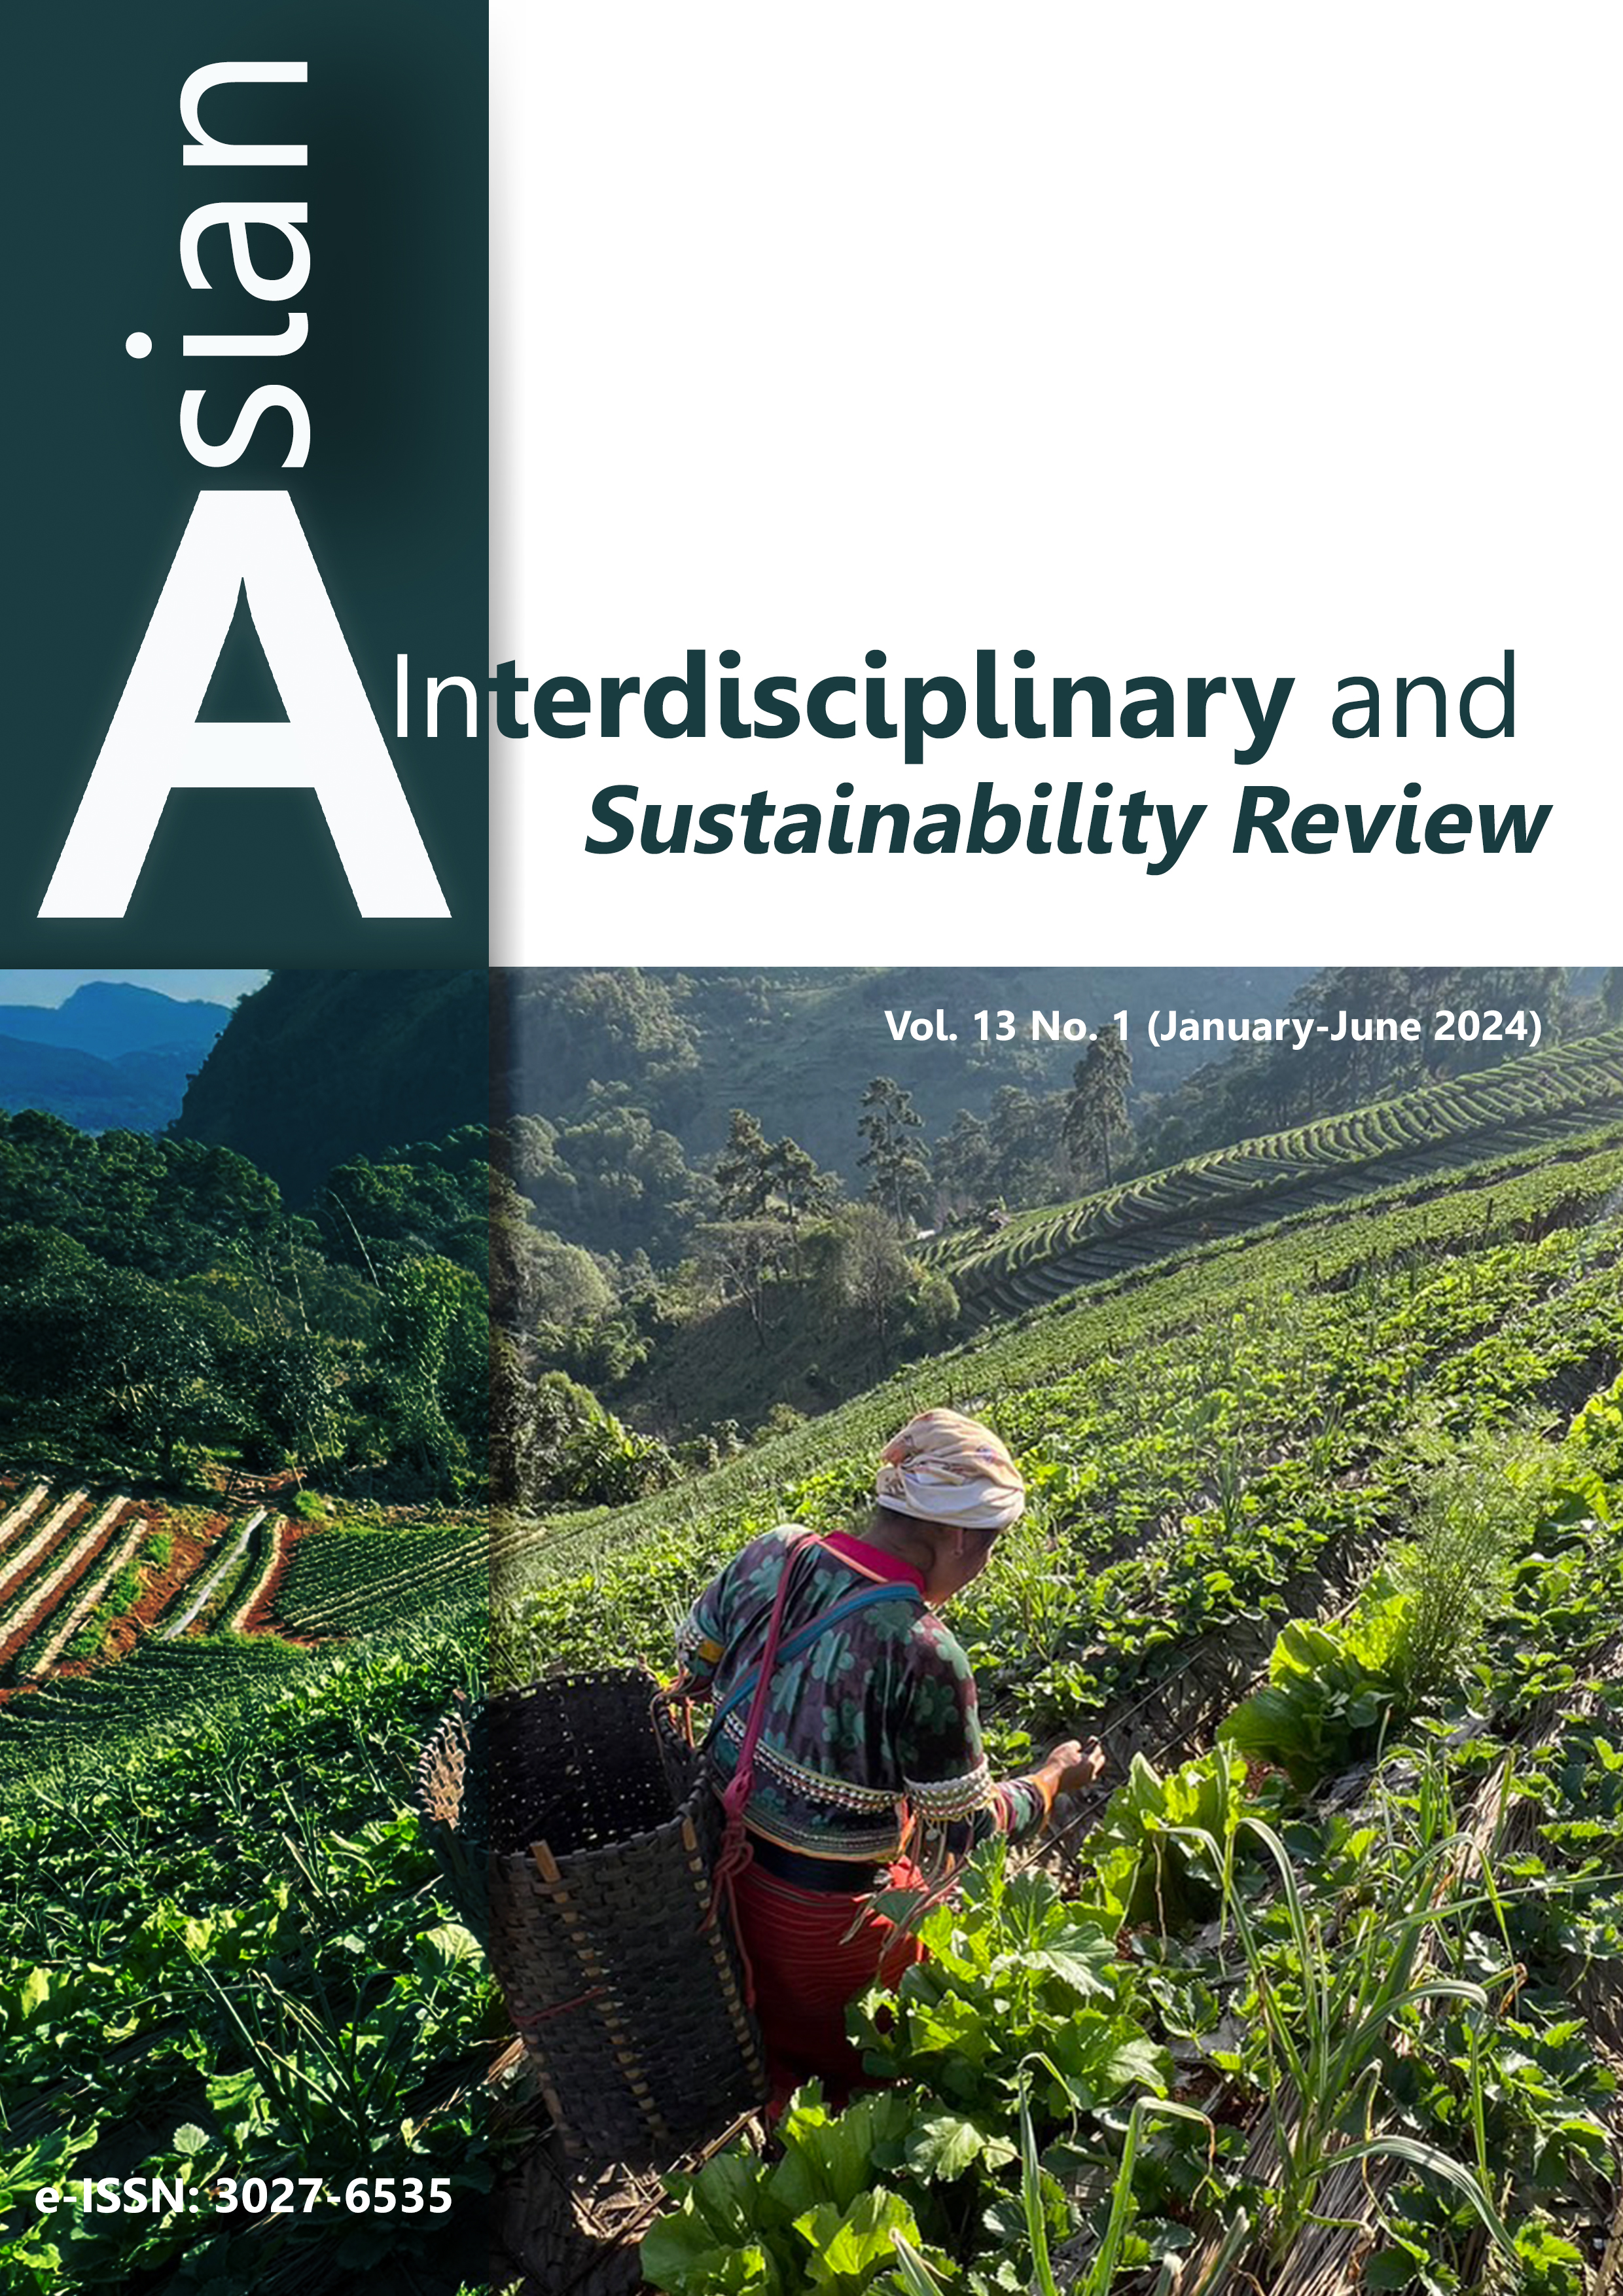 					View Vol. 13 No. 1 (2024): Asian Interdisciplinary and Sustainability Review
				